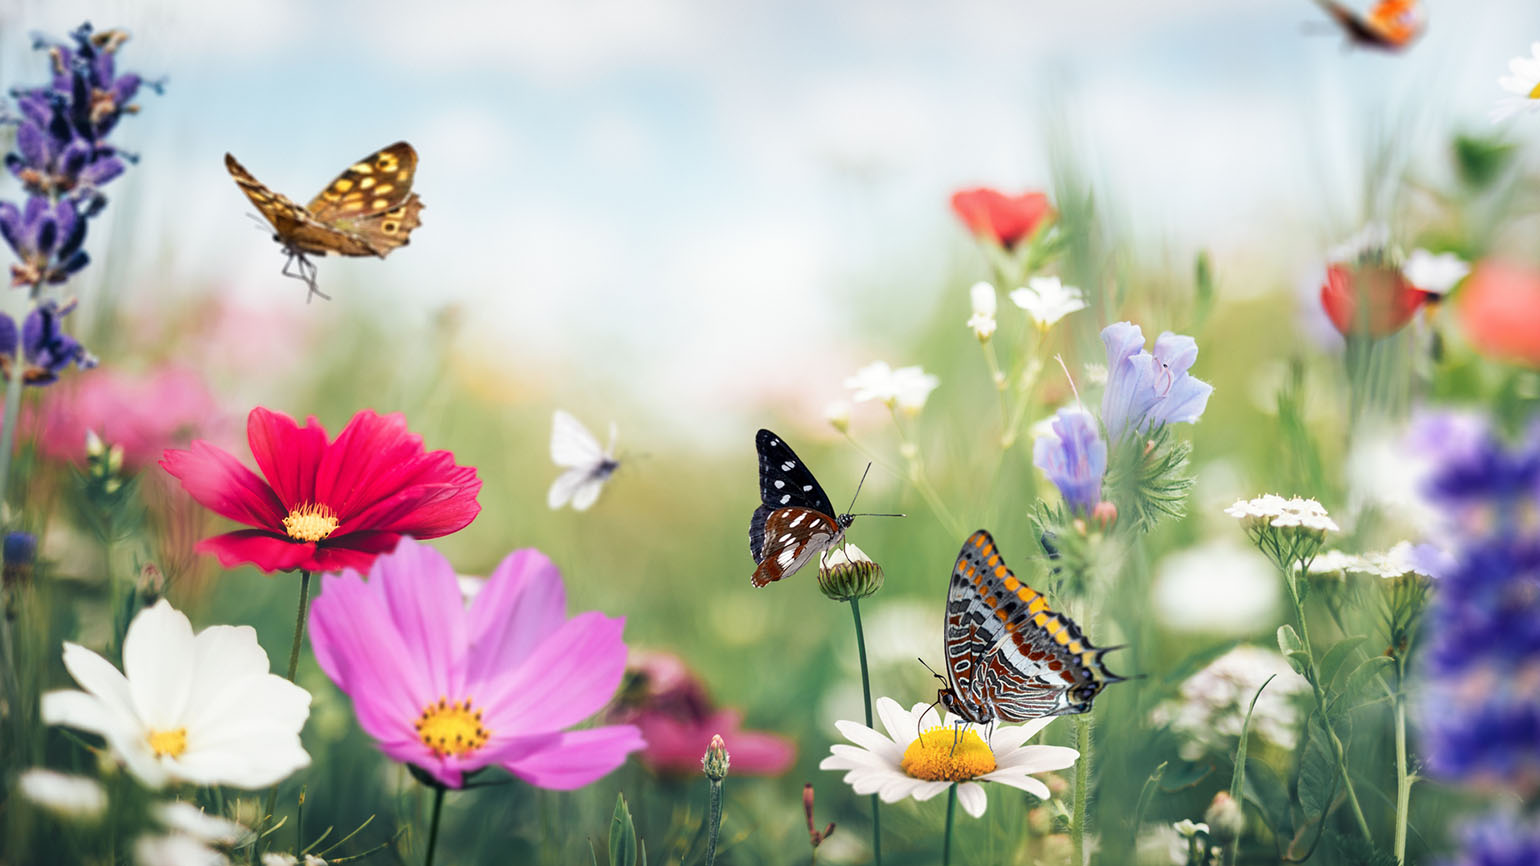 Summer garden full of colourful flowers and flying butterflies shows us how to flourish.